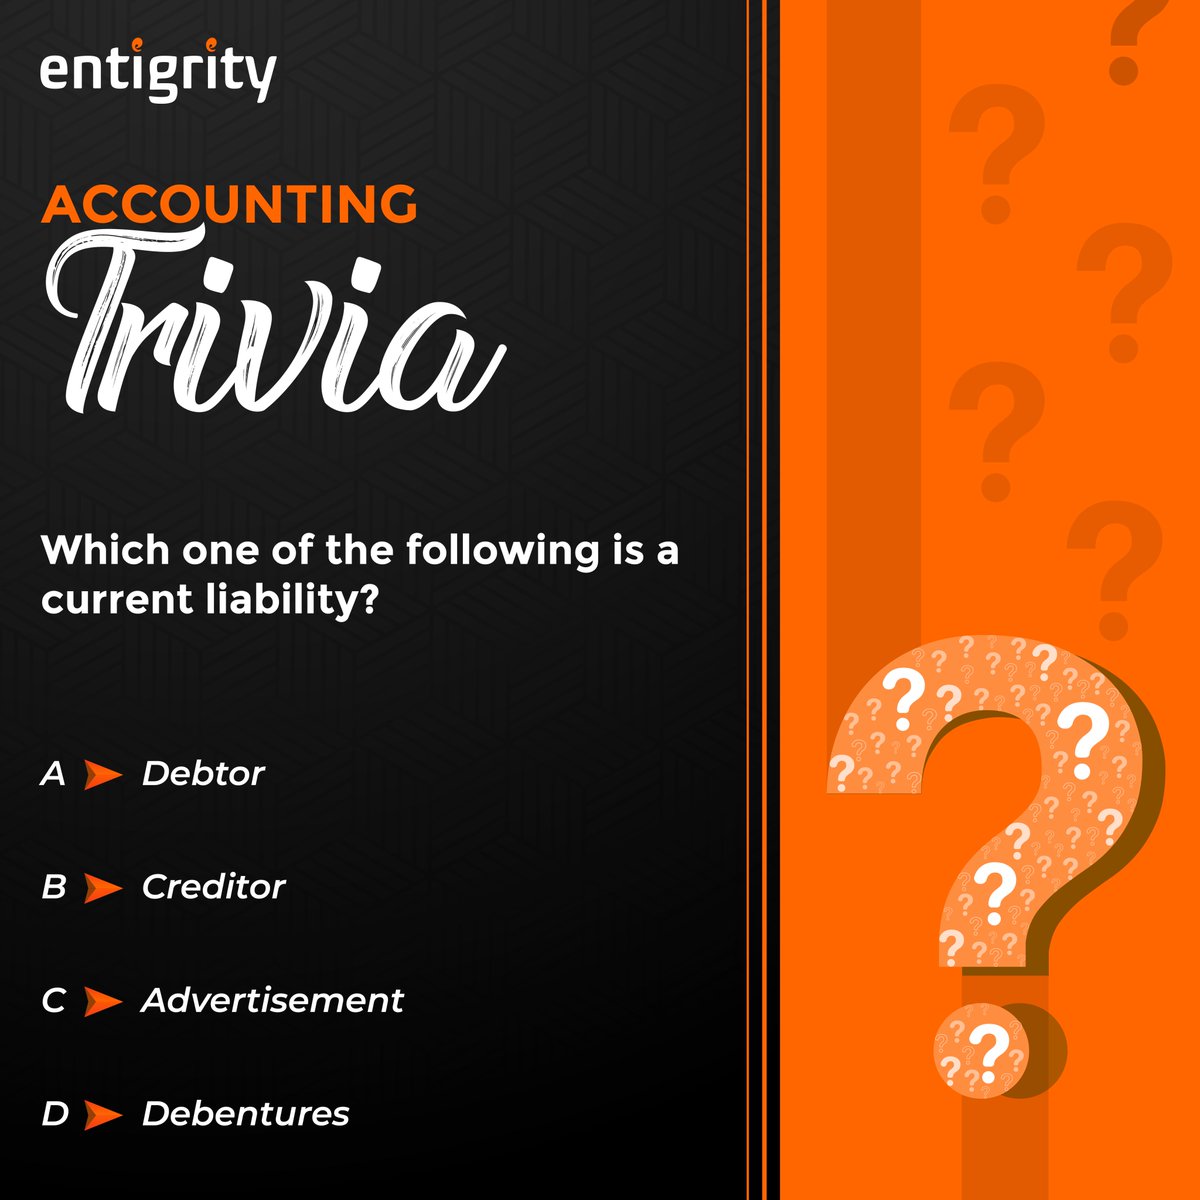 Here we go again with the Accounting Trivia Quiz! Answer the simple question and show your Accounting Knowledge! #Entigrity #Accounting #AccountingQuiz